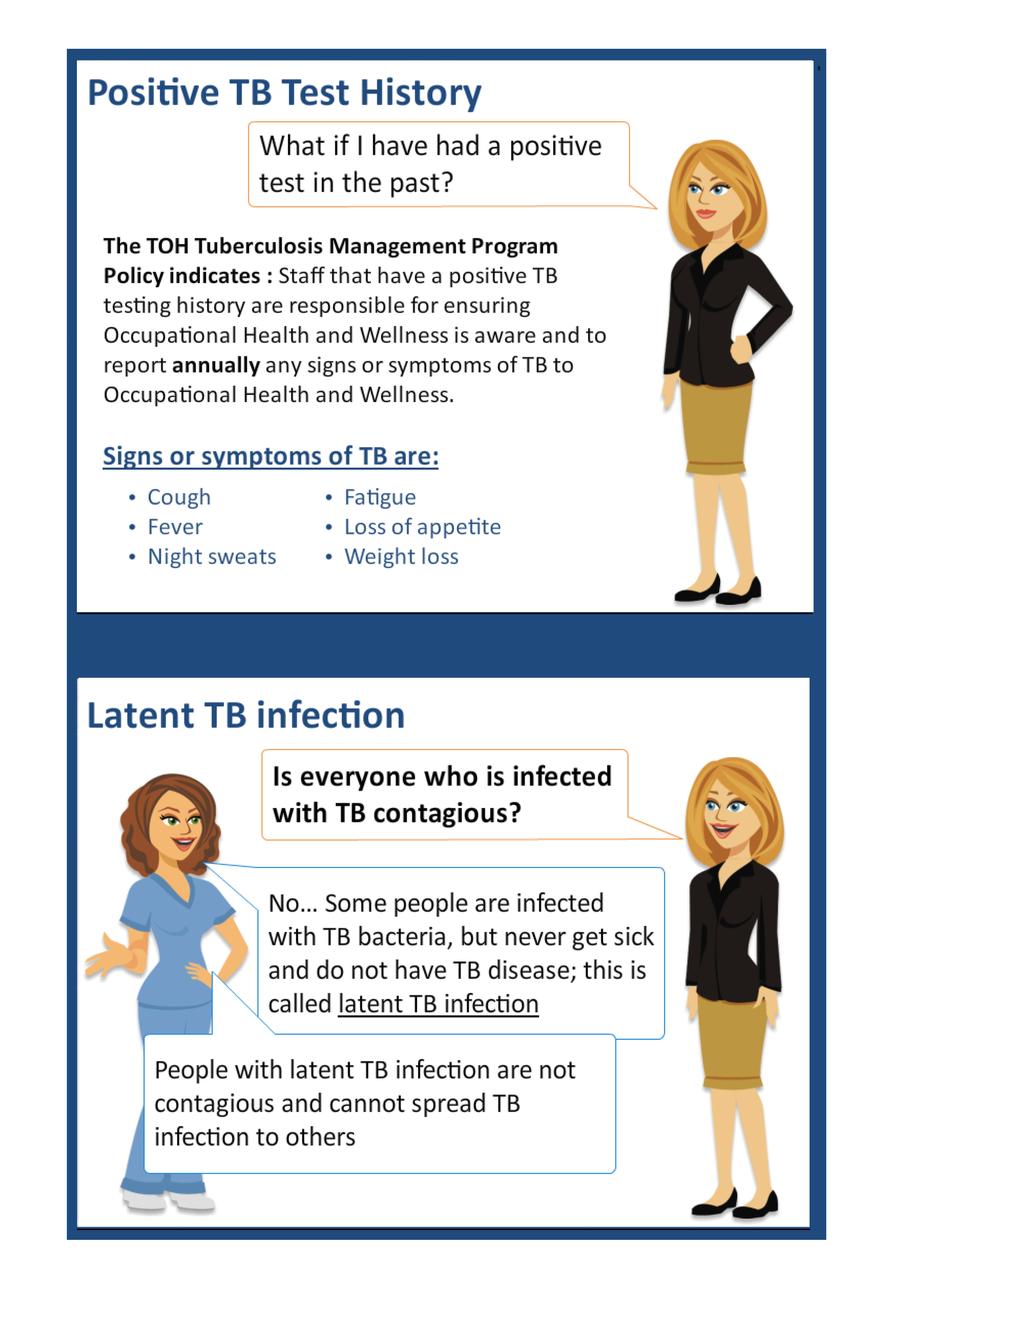 Positive TB Test History What if I have had a positive test in the past?